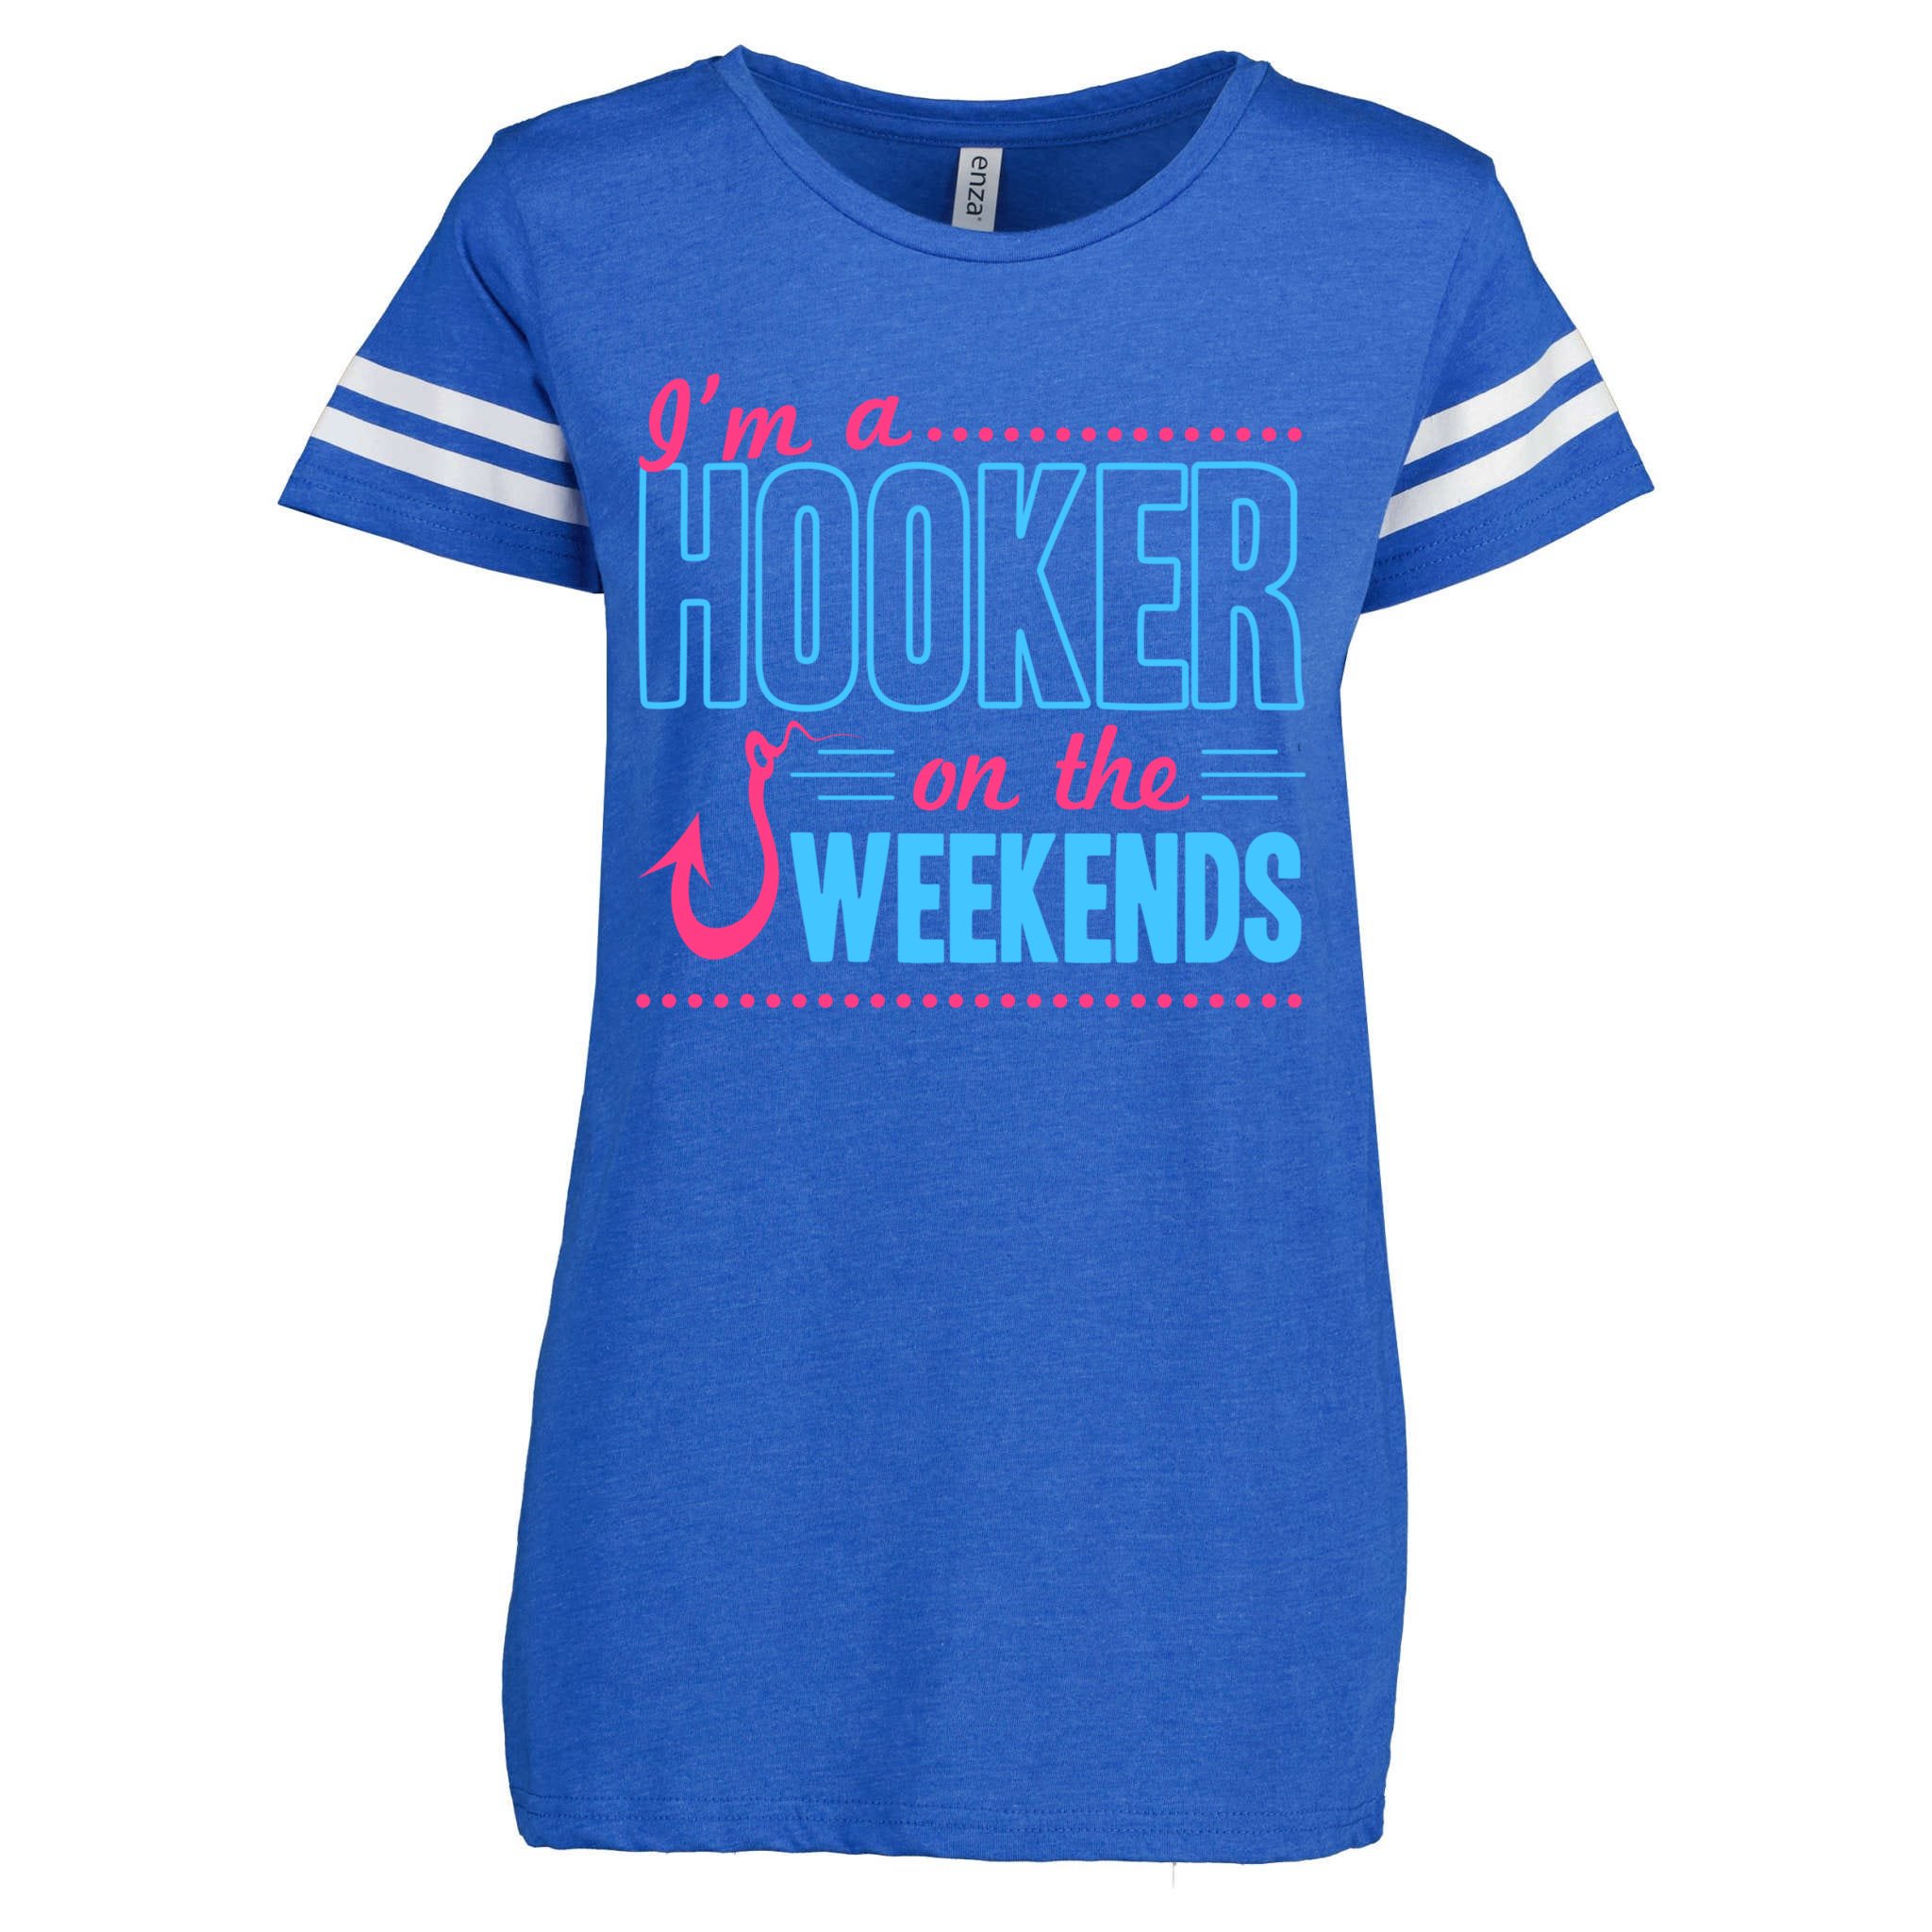 Funny fishing, I'm a Hooker on the weekend, Fishing Gift, Fly